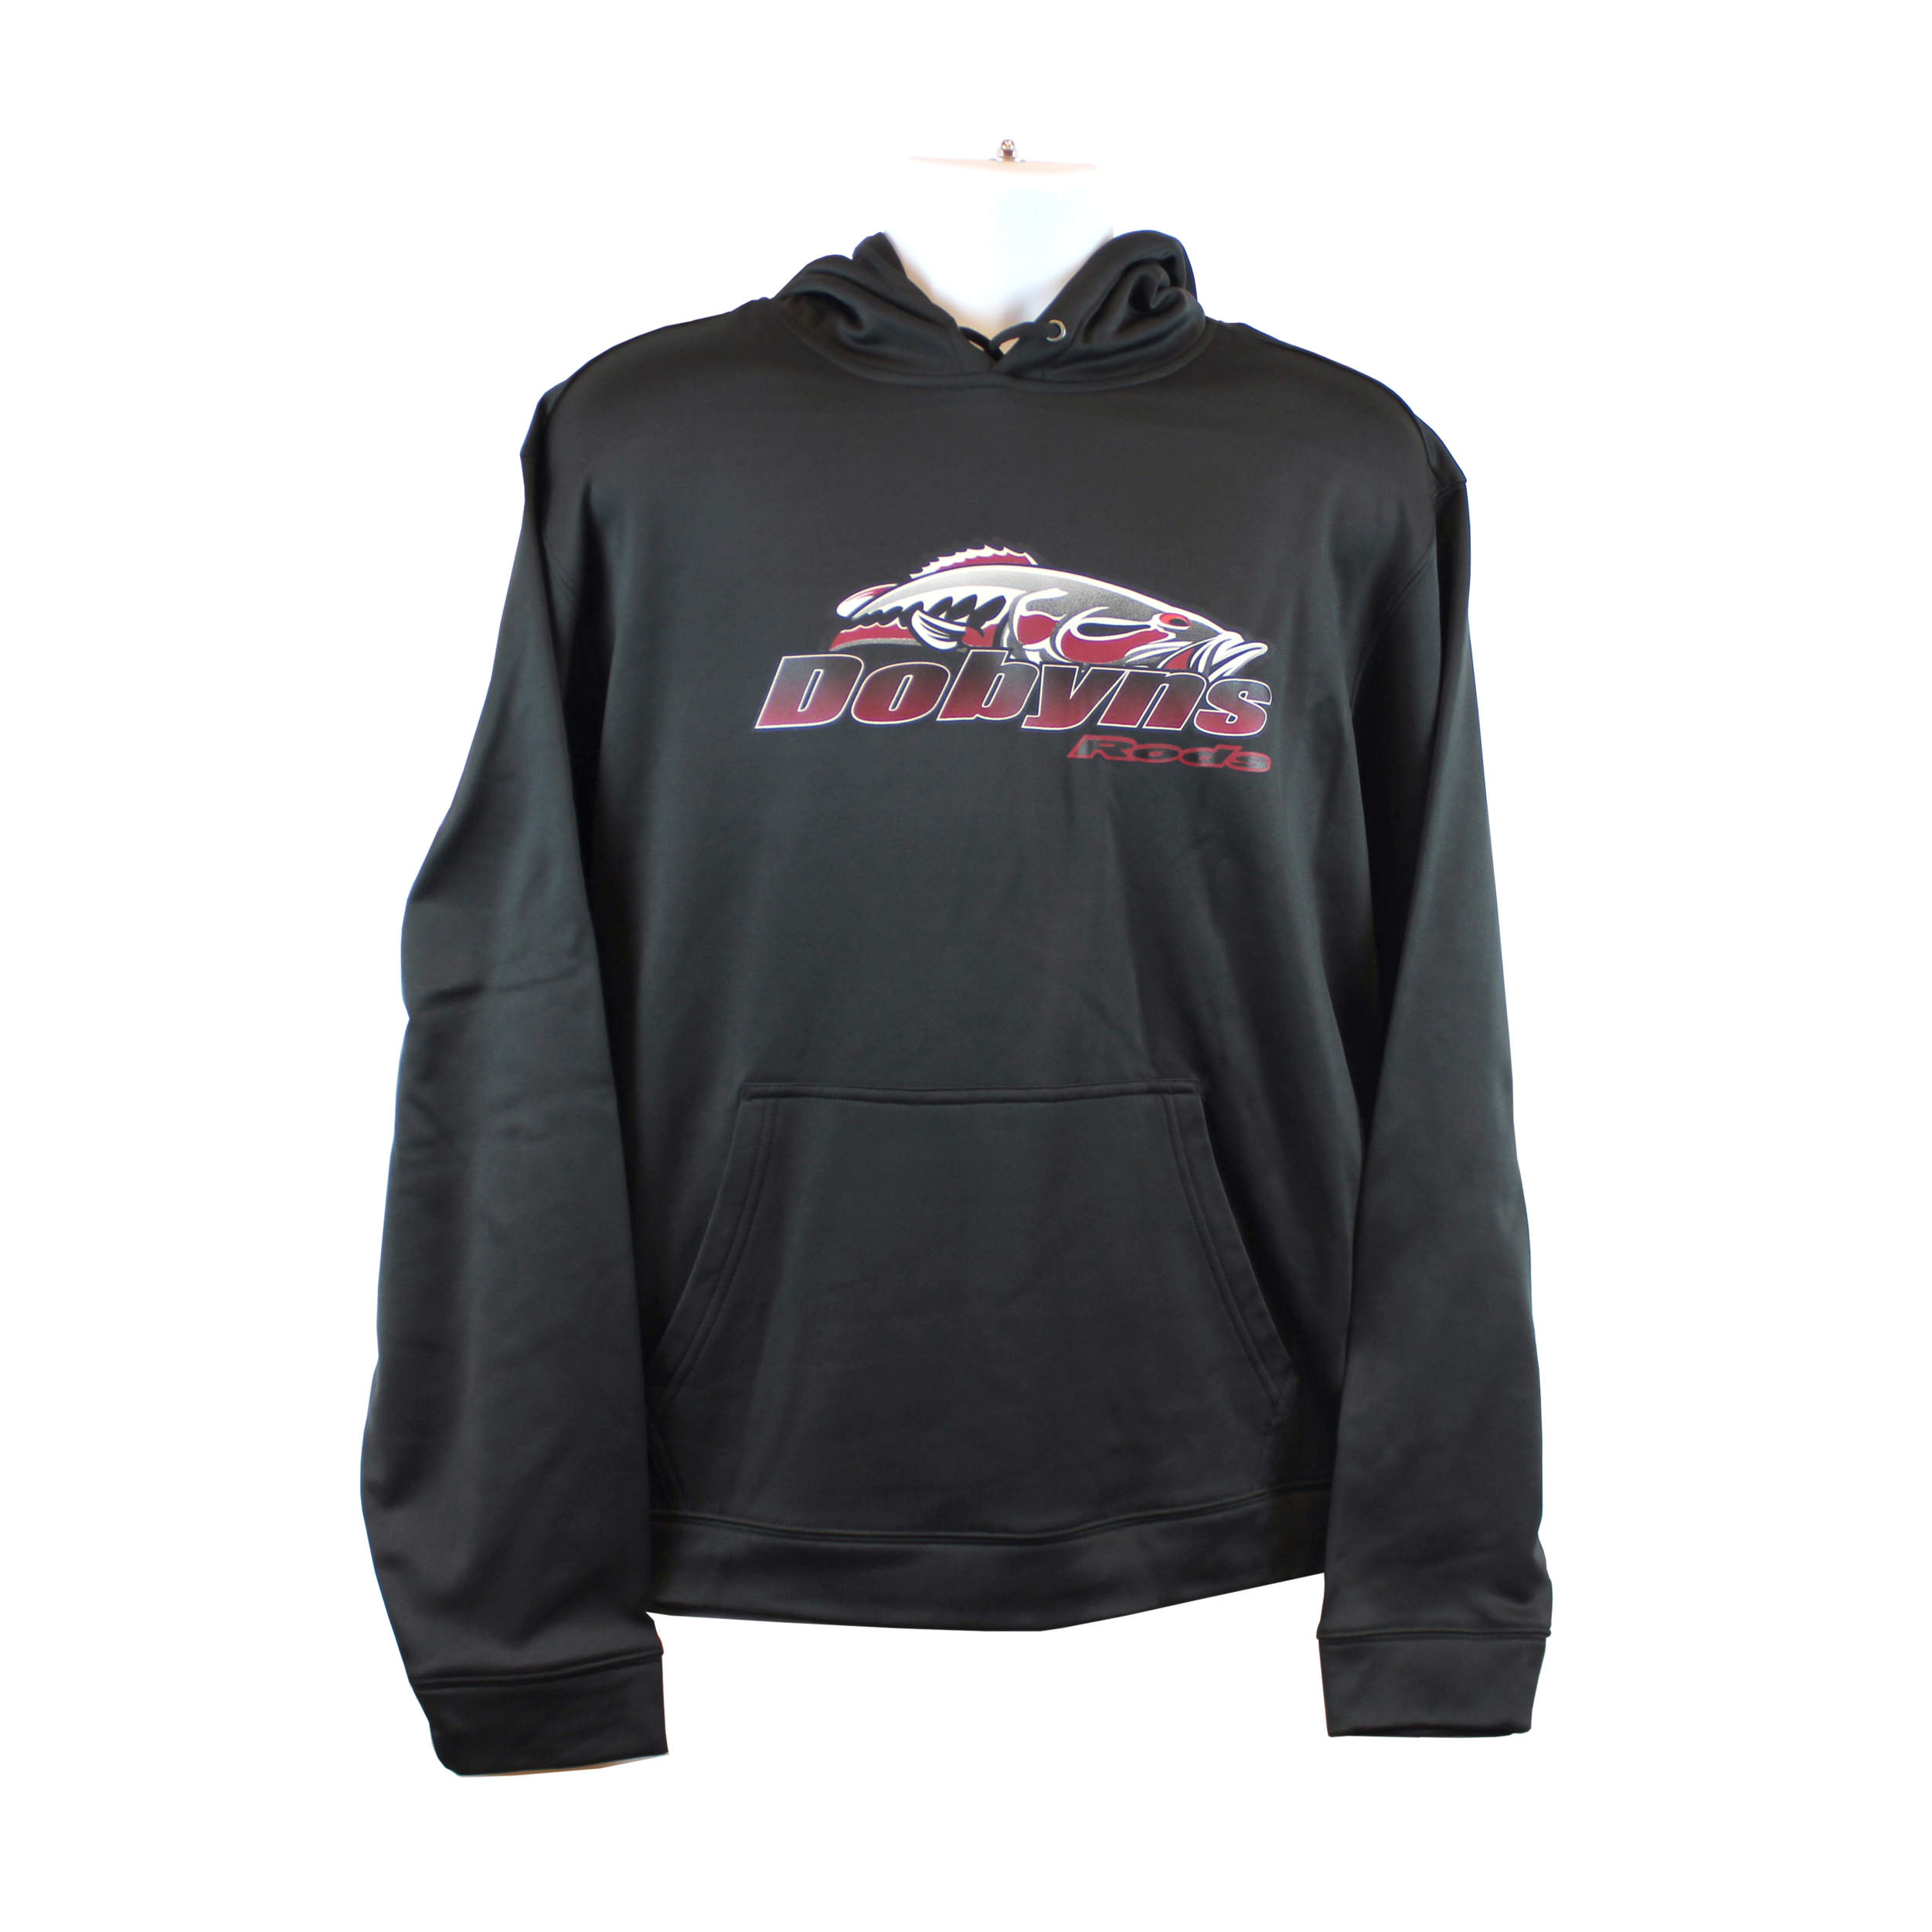 Dobyns Polyester Hoodie- Black with Maroon logo